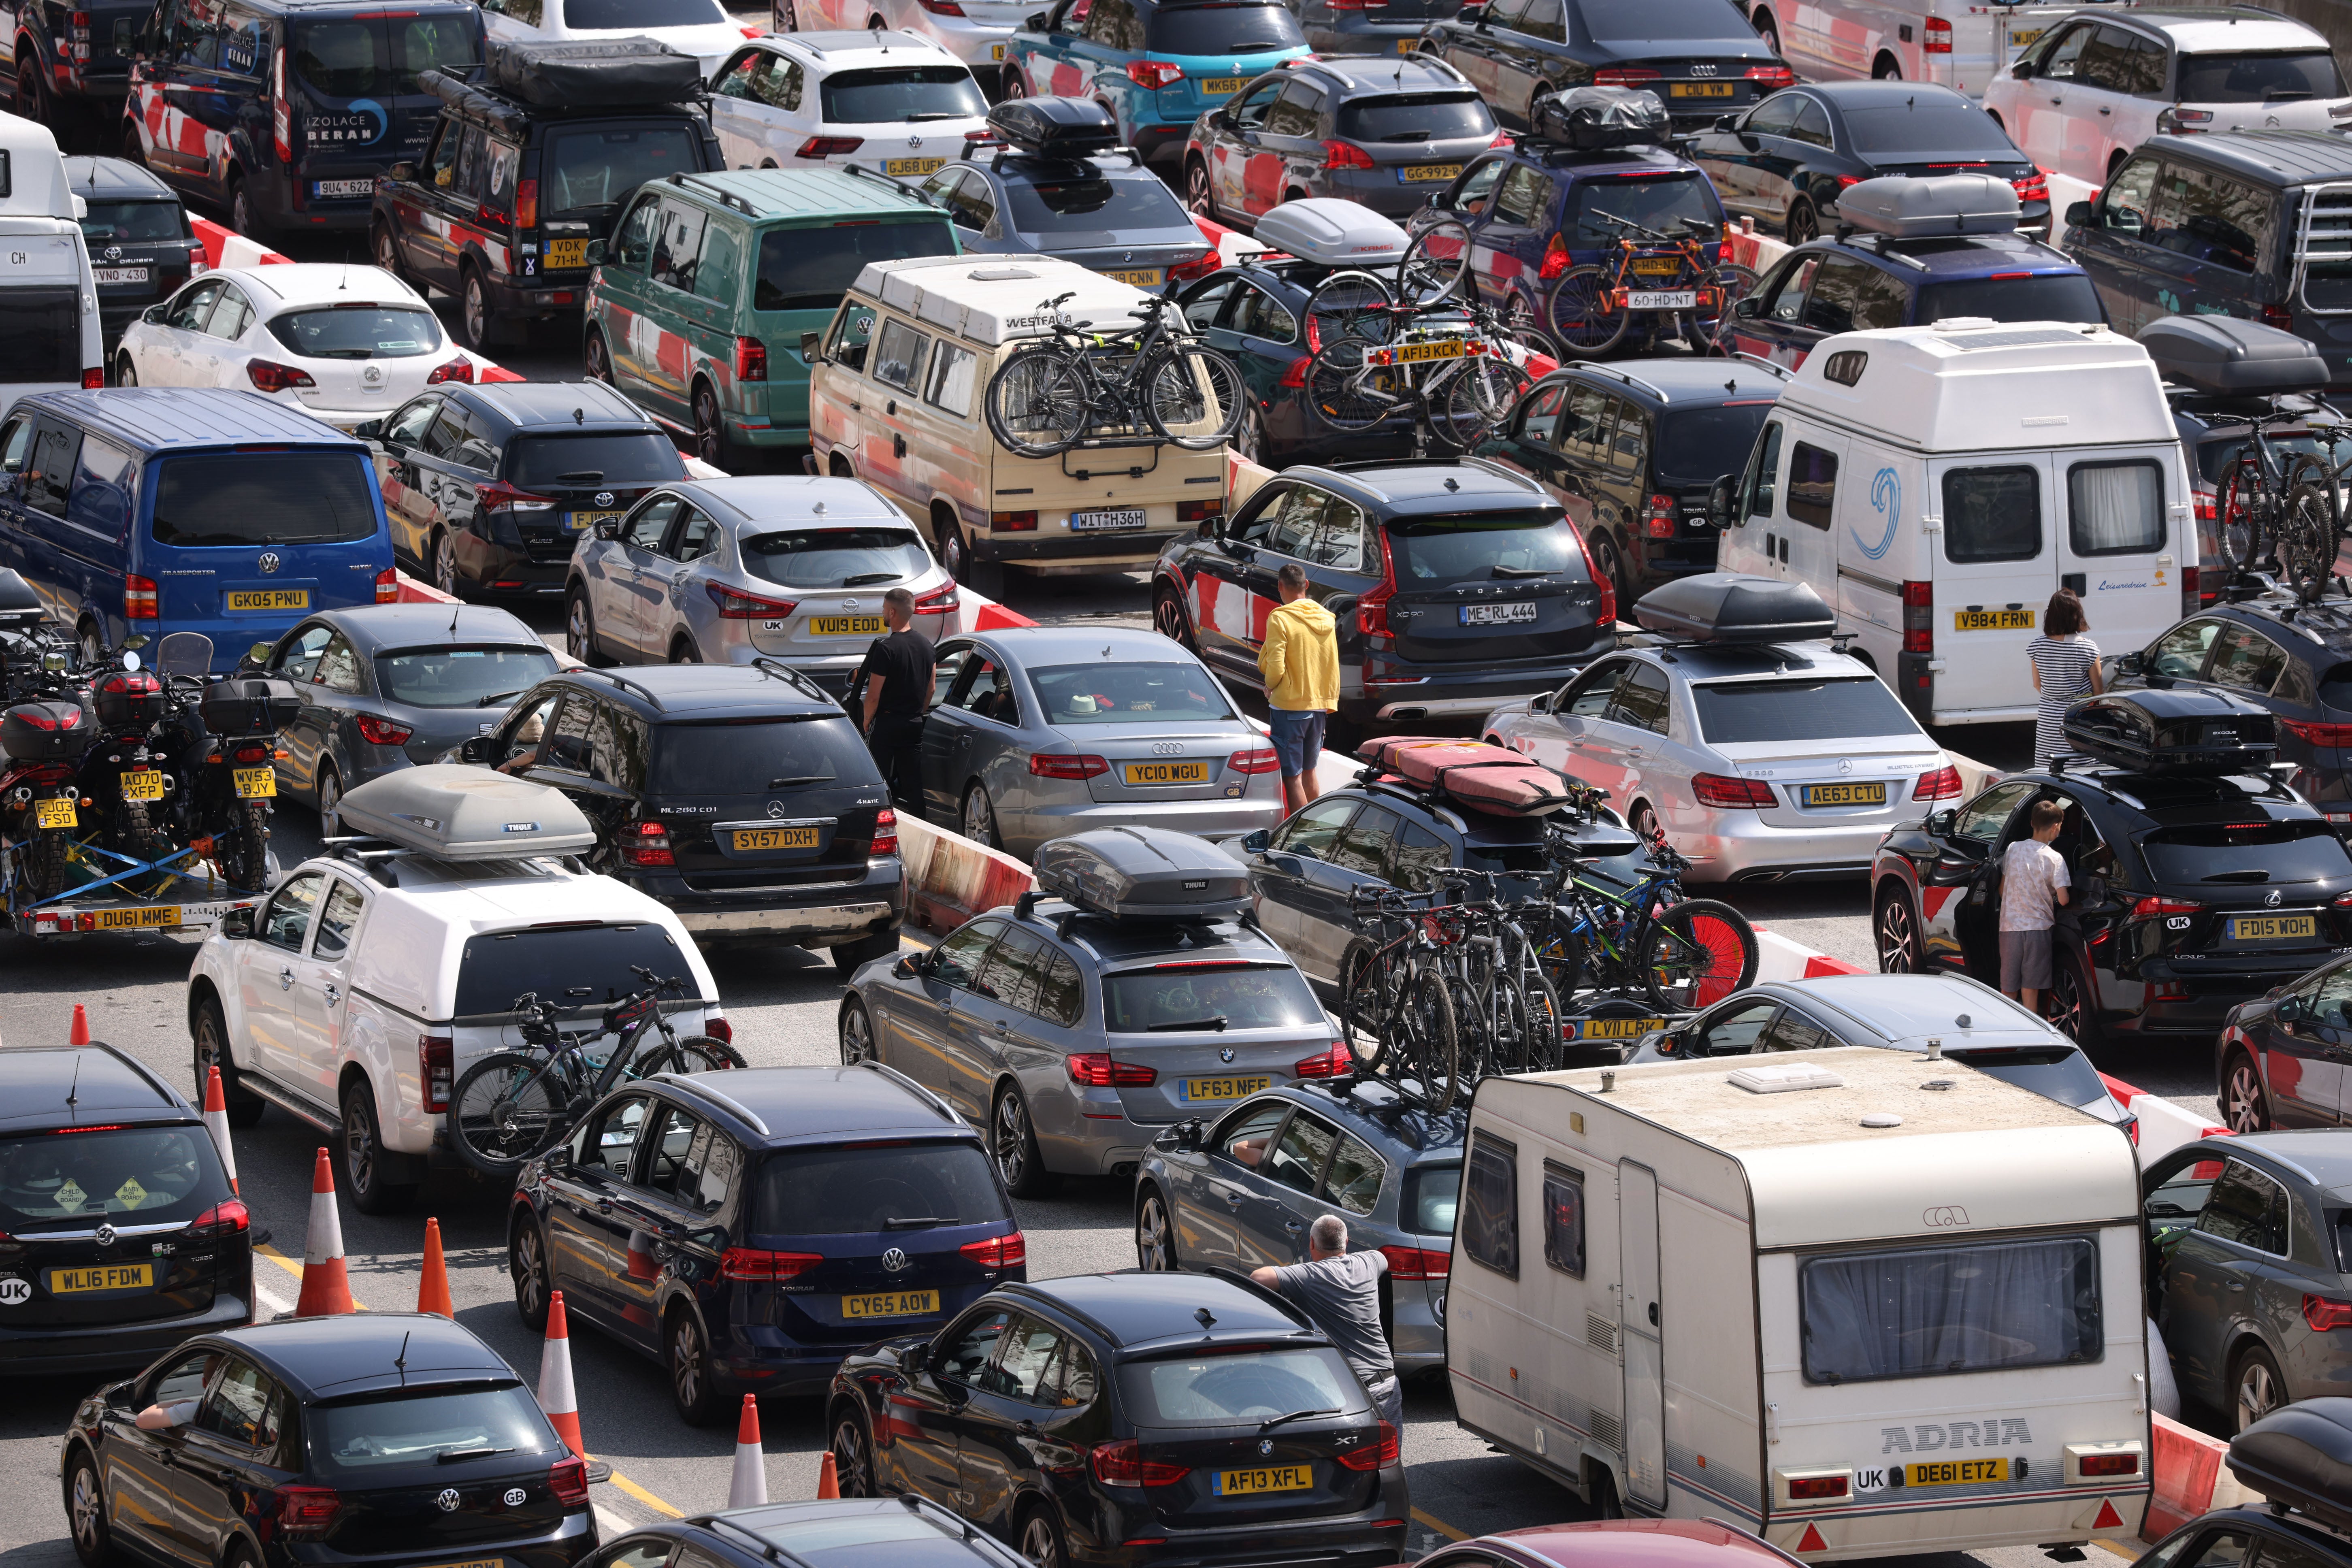 Supporters of Brexit cannot pretend that the queues at Dover are nothing to do with their decision